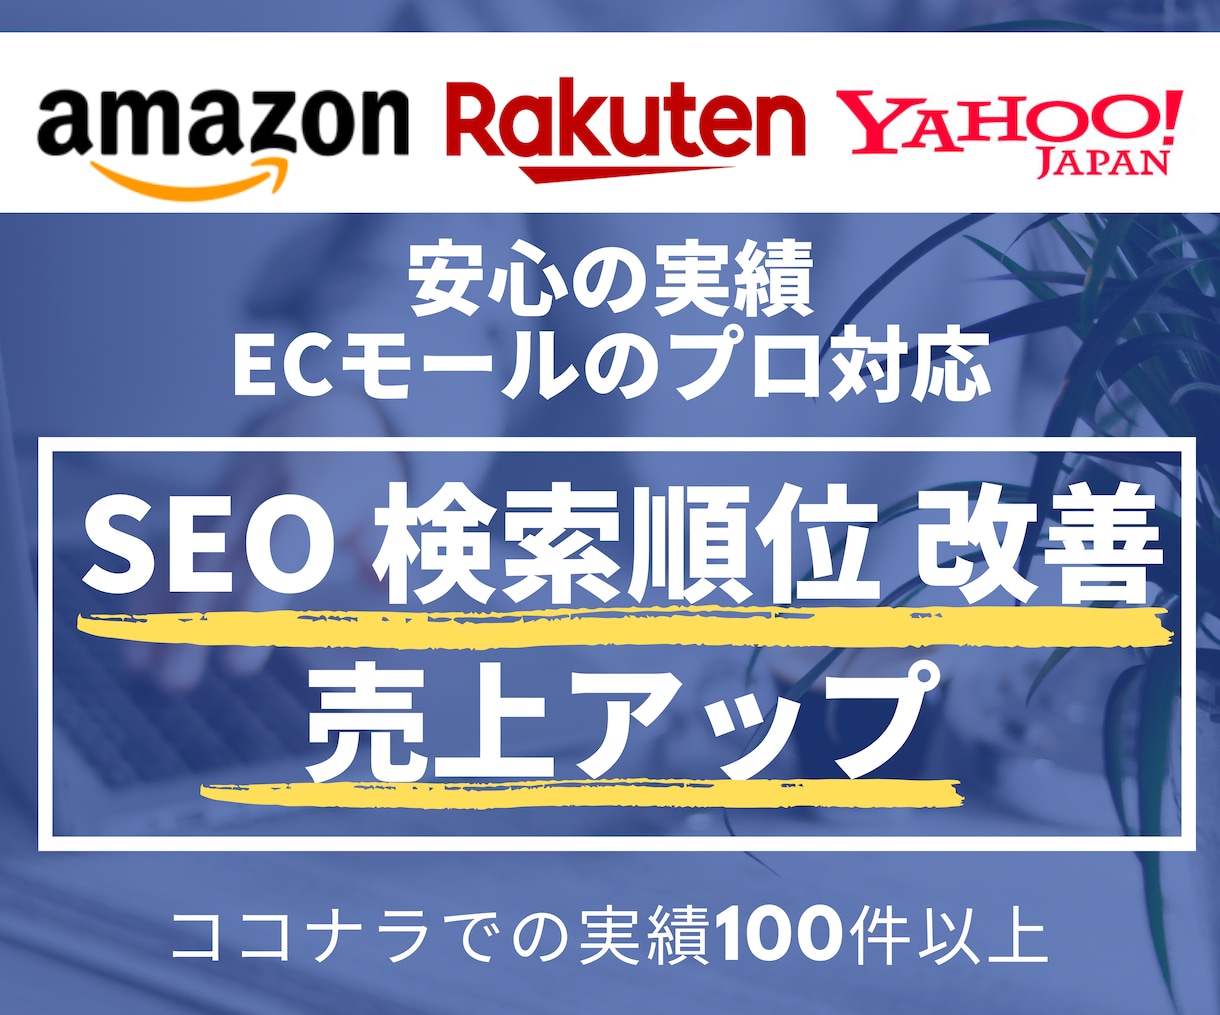 💬Coconara | EC professionals will take care of Amazon Rakuten SEO ★ Post-delivery support included ★ Increase sales and customer acquisition with keyword SEO measures | EC consulting/operation agency